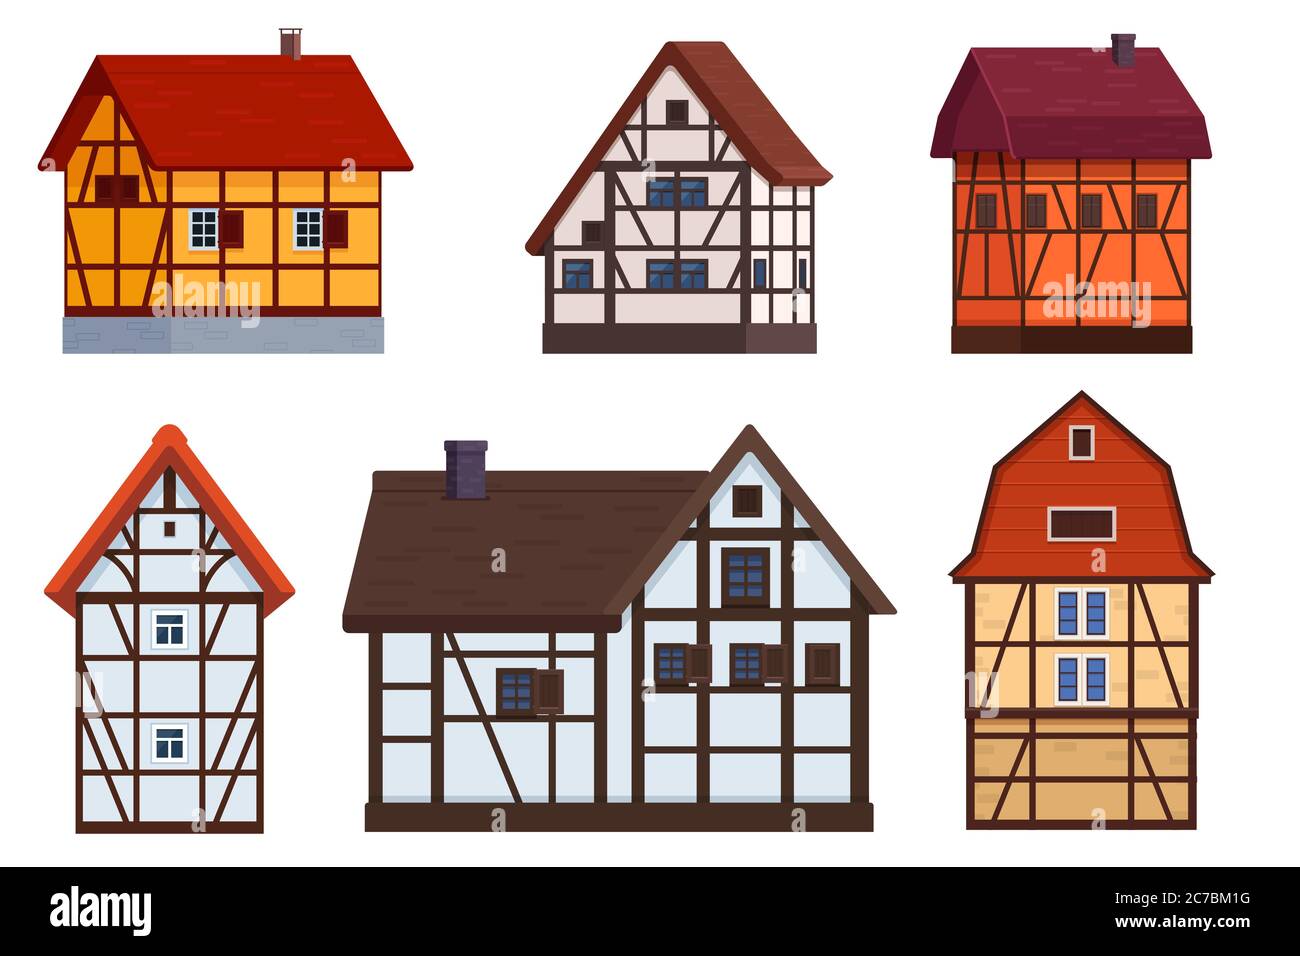 Set of half timbered houses on white Stock Vector